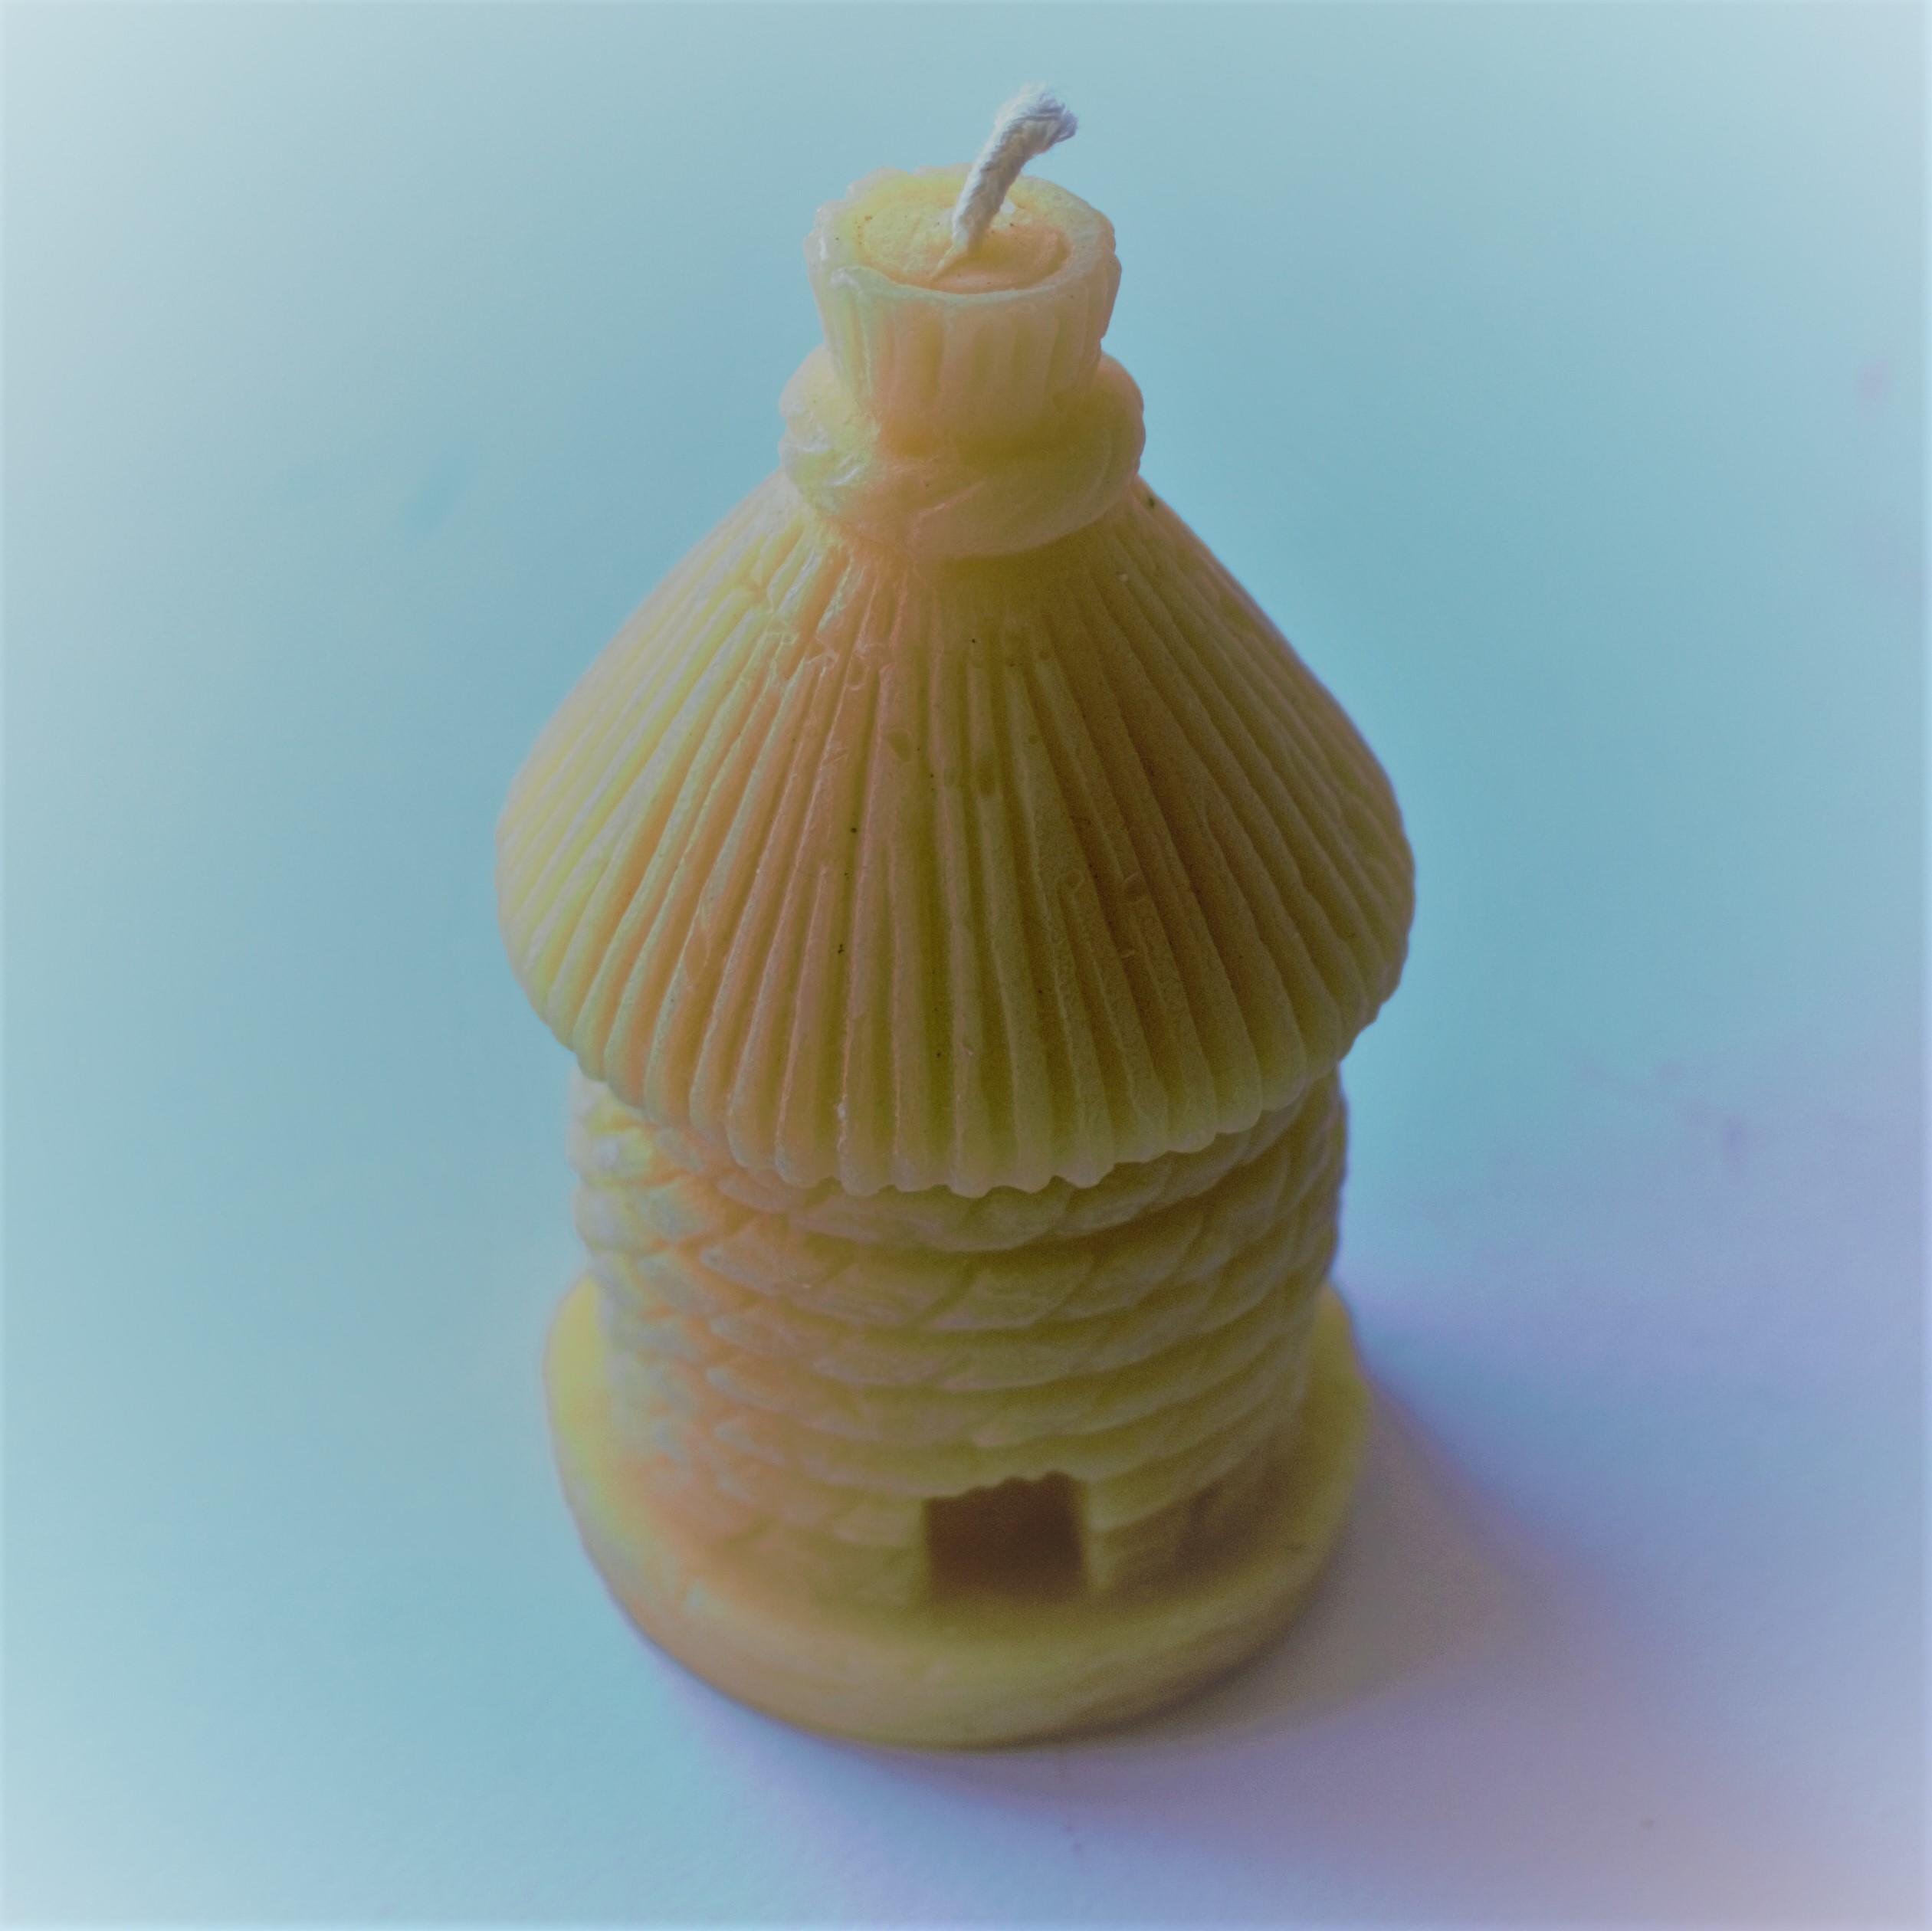 Thatched skep pure beeswax candle